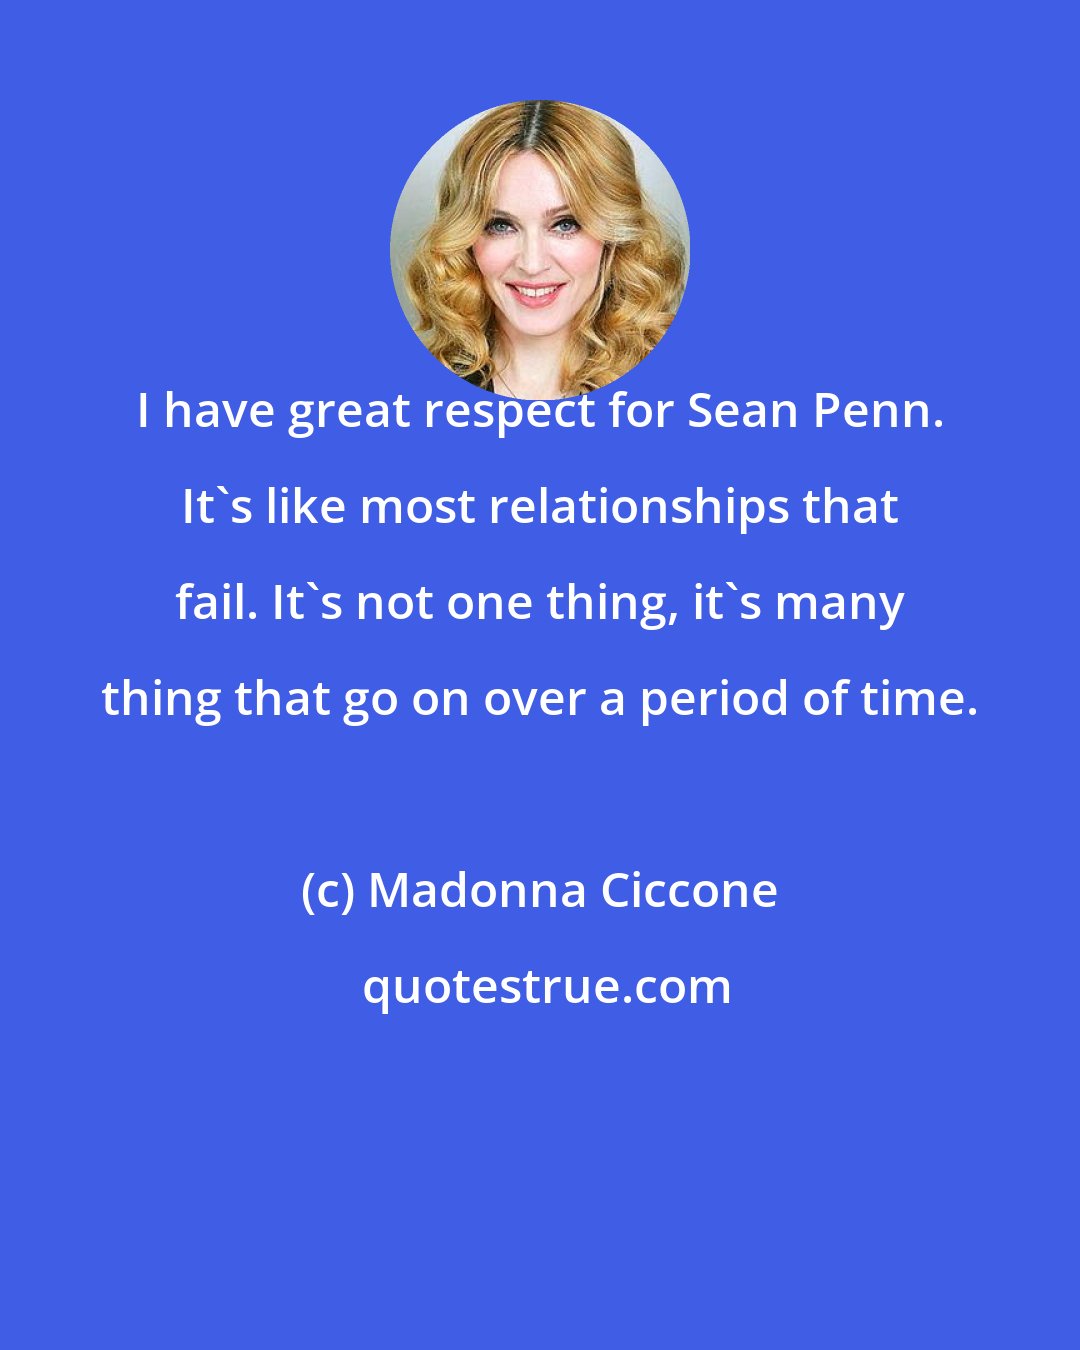 Madonna Ciccone: I have great respect for Sean Penn. It's like most relationships that fail. It's not one thing, it's many thing that go on over a period of time.